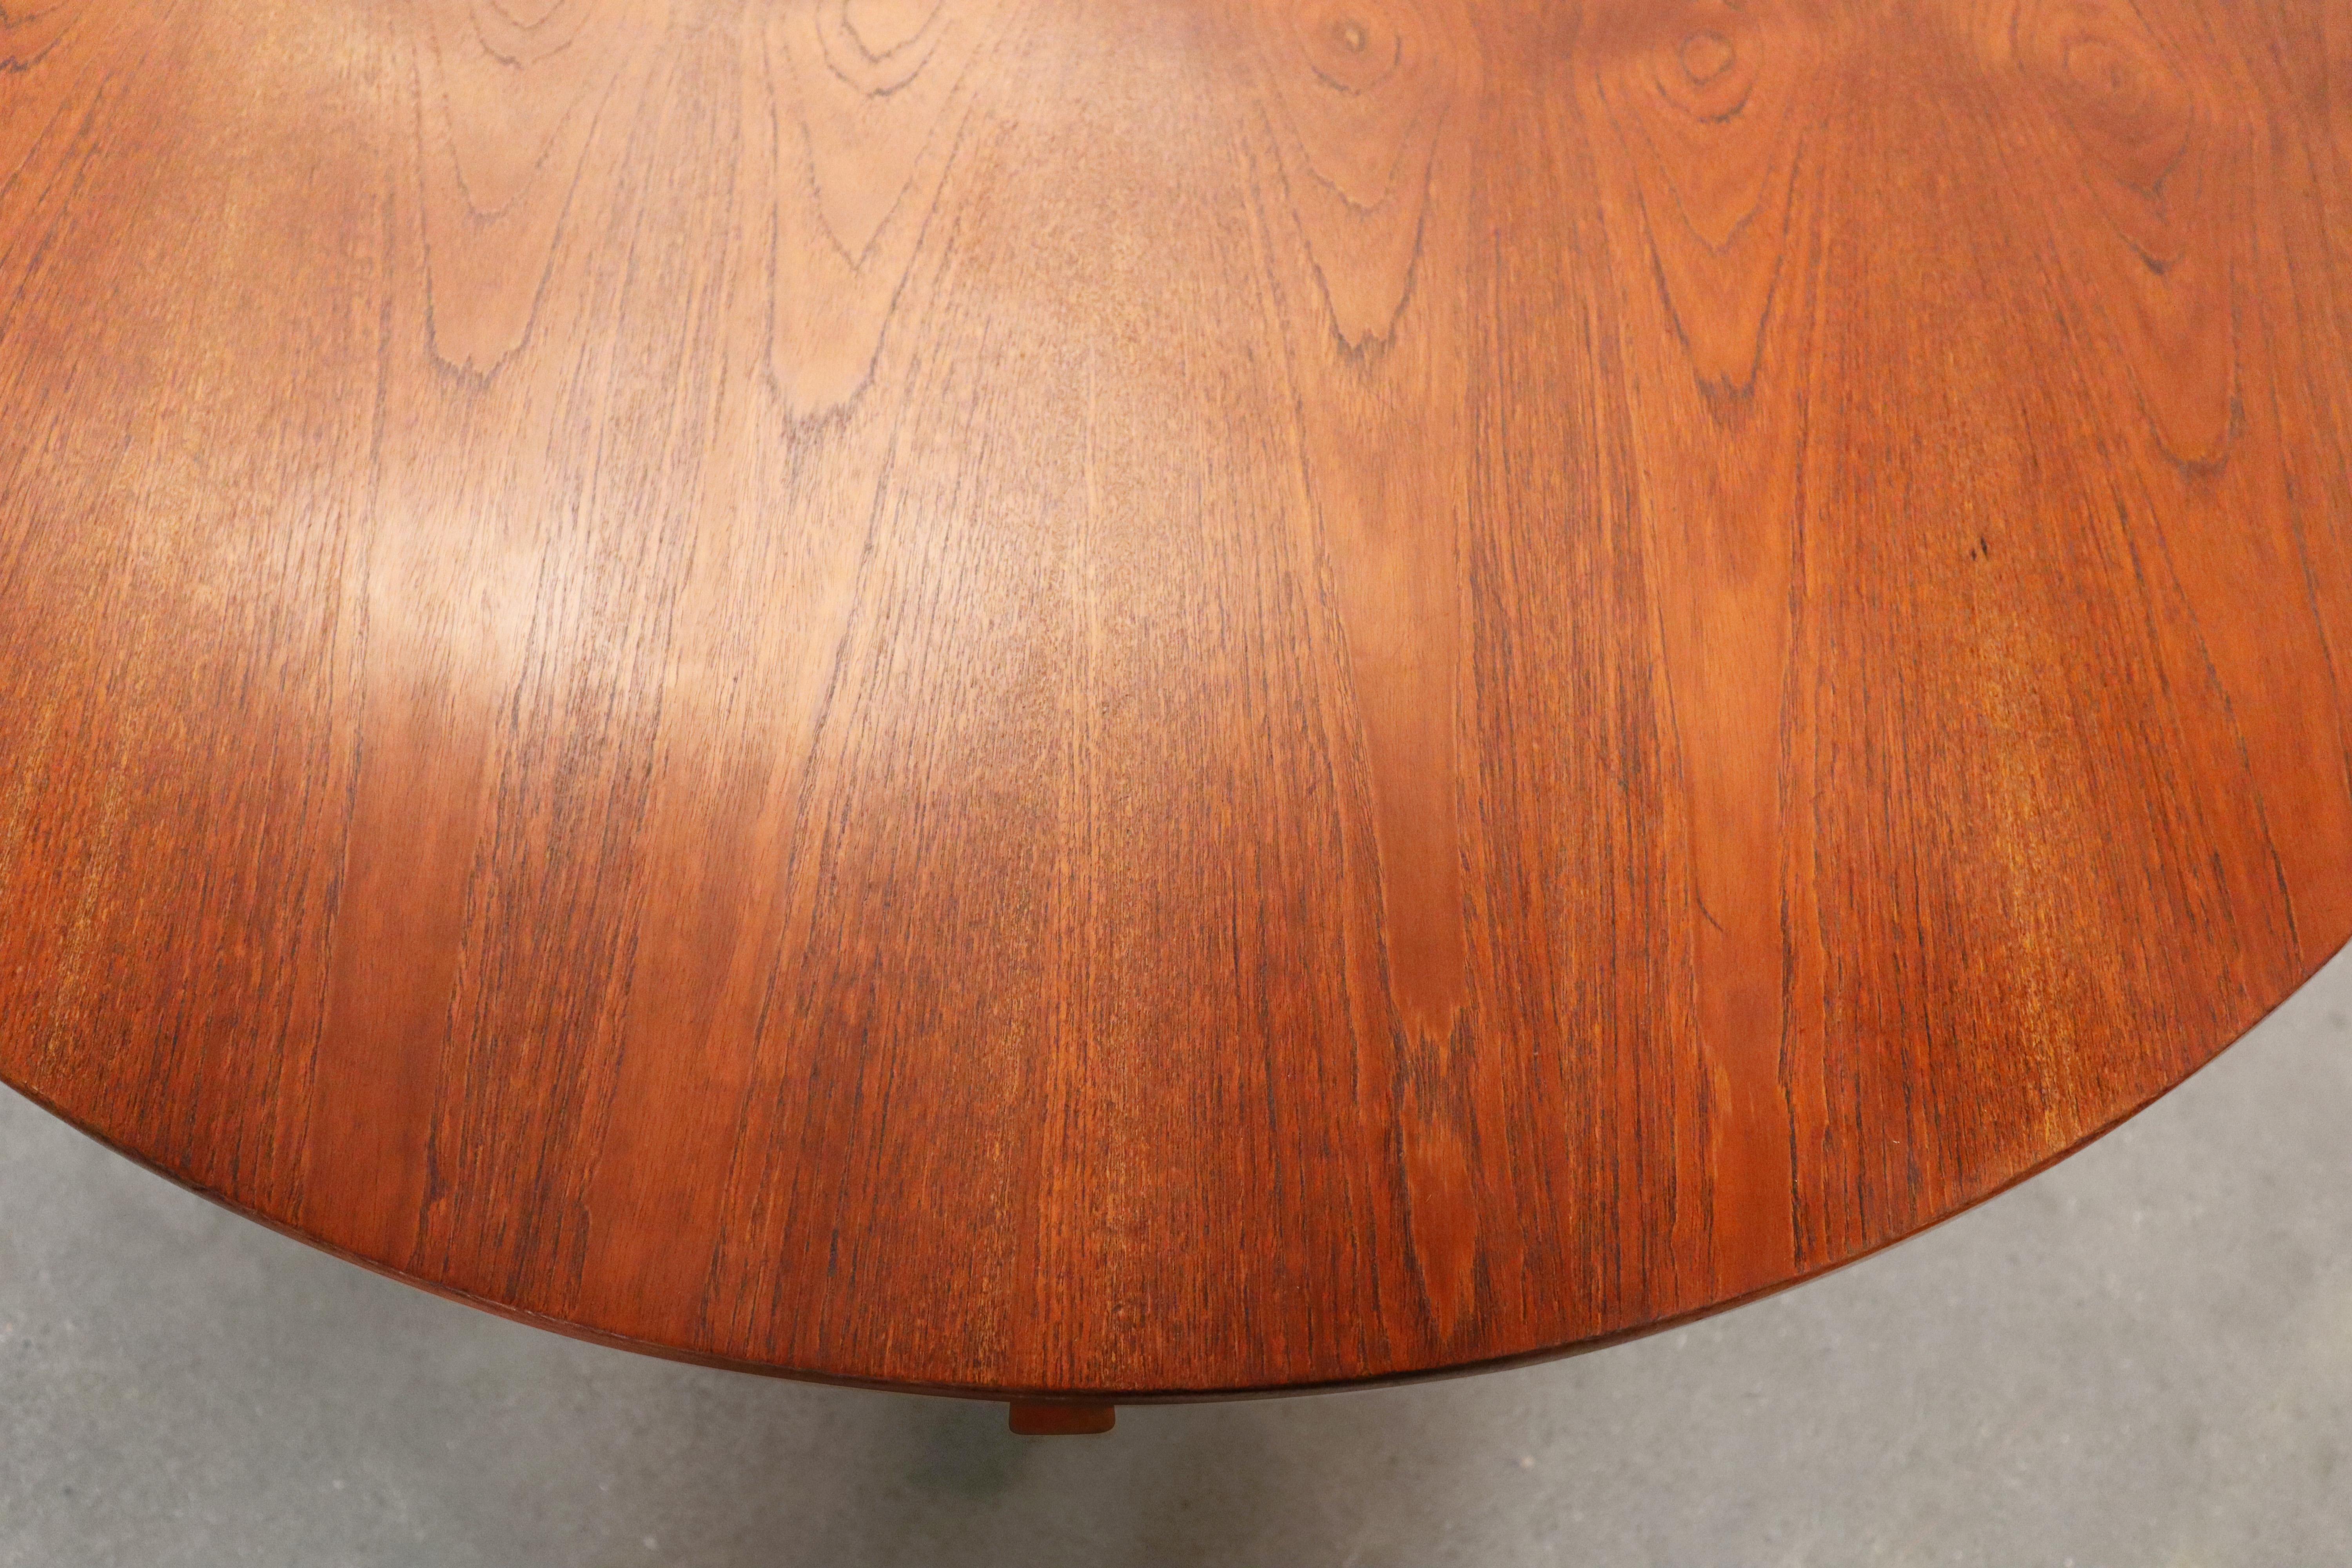 Mid-20th Century Gianfranco Frattini Round Dining Table for Bernini in Exotic Hardwood, Model 522 For Sale